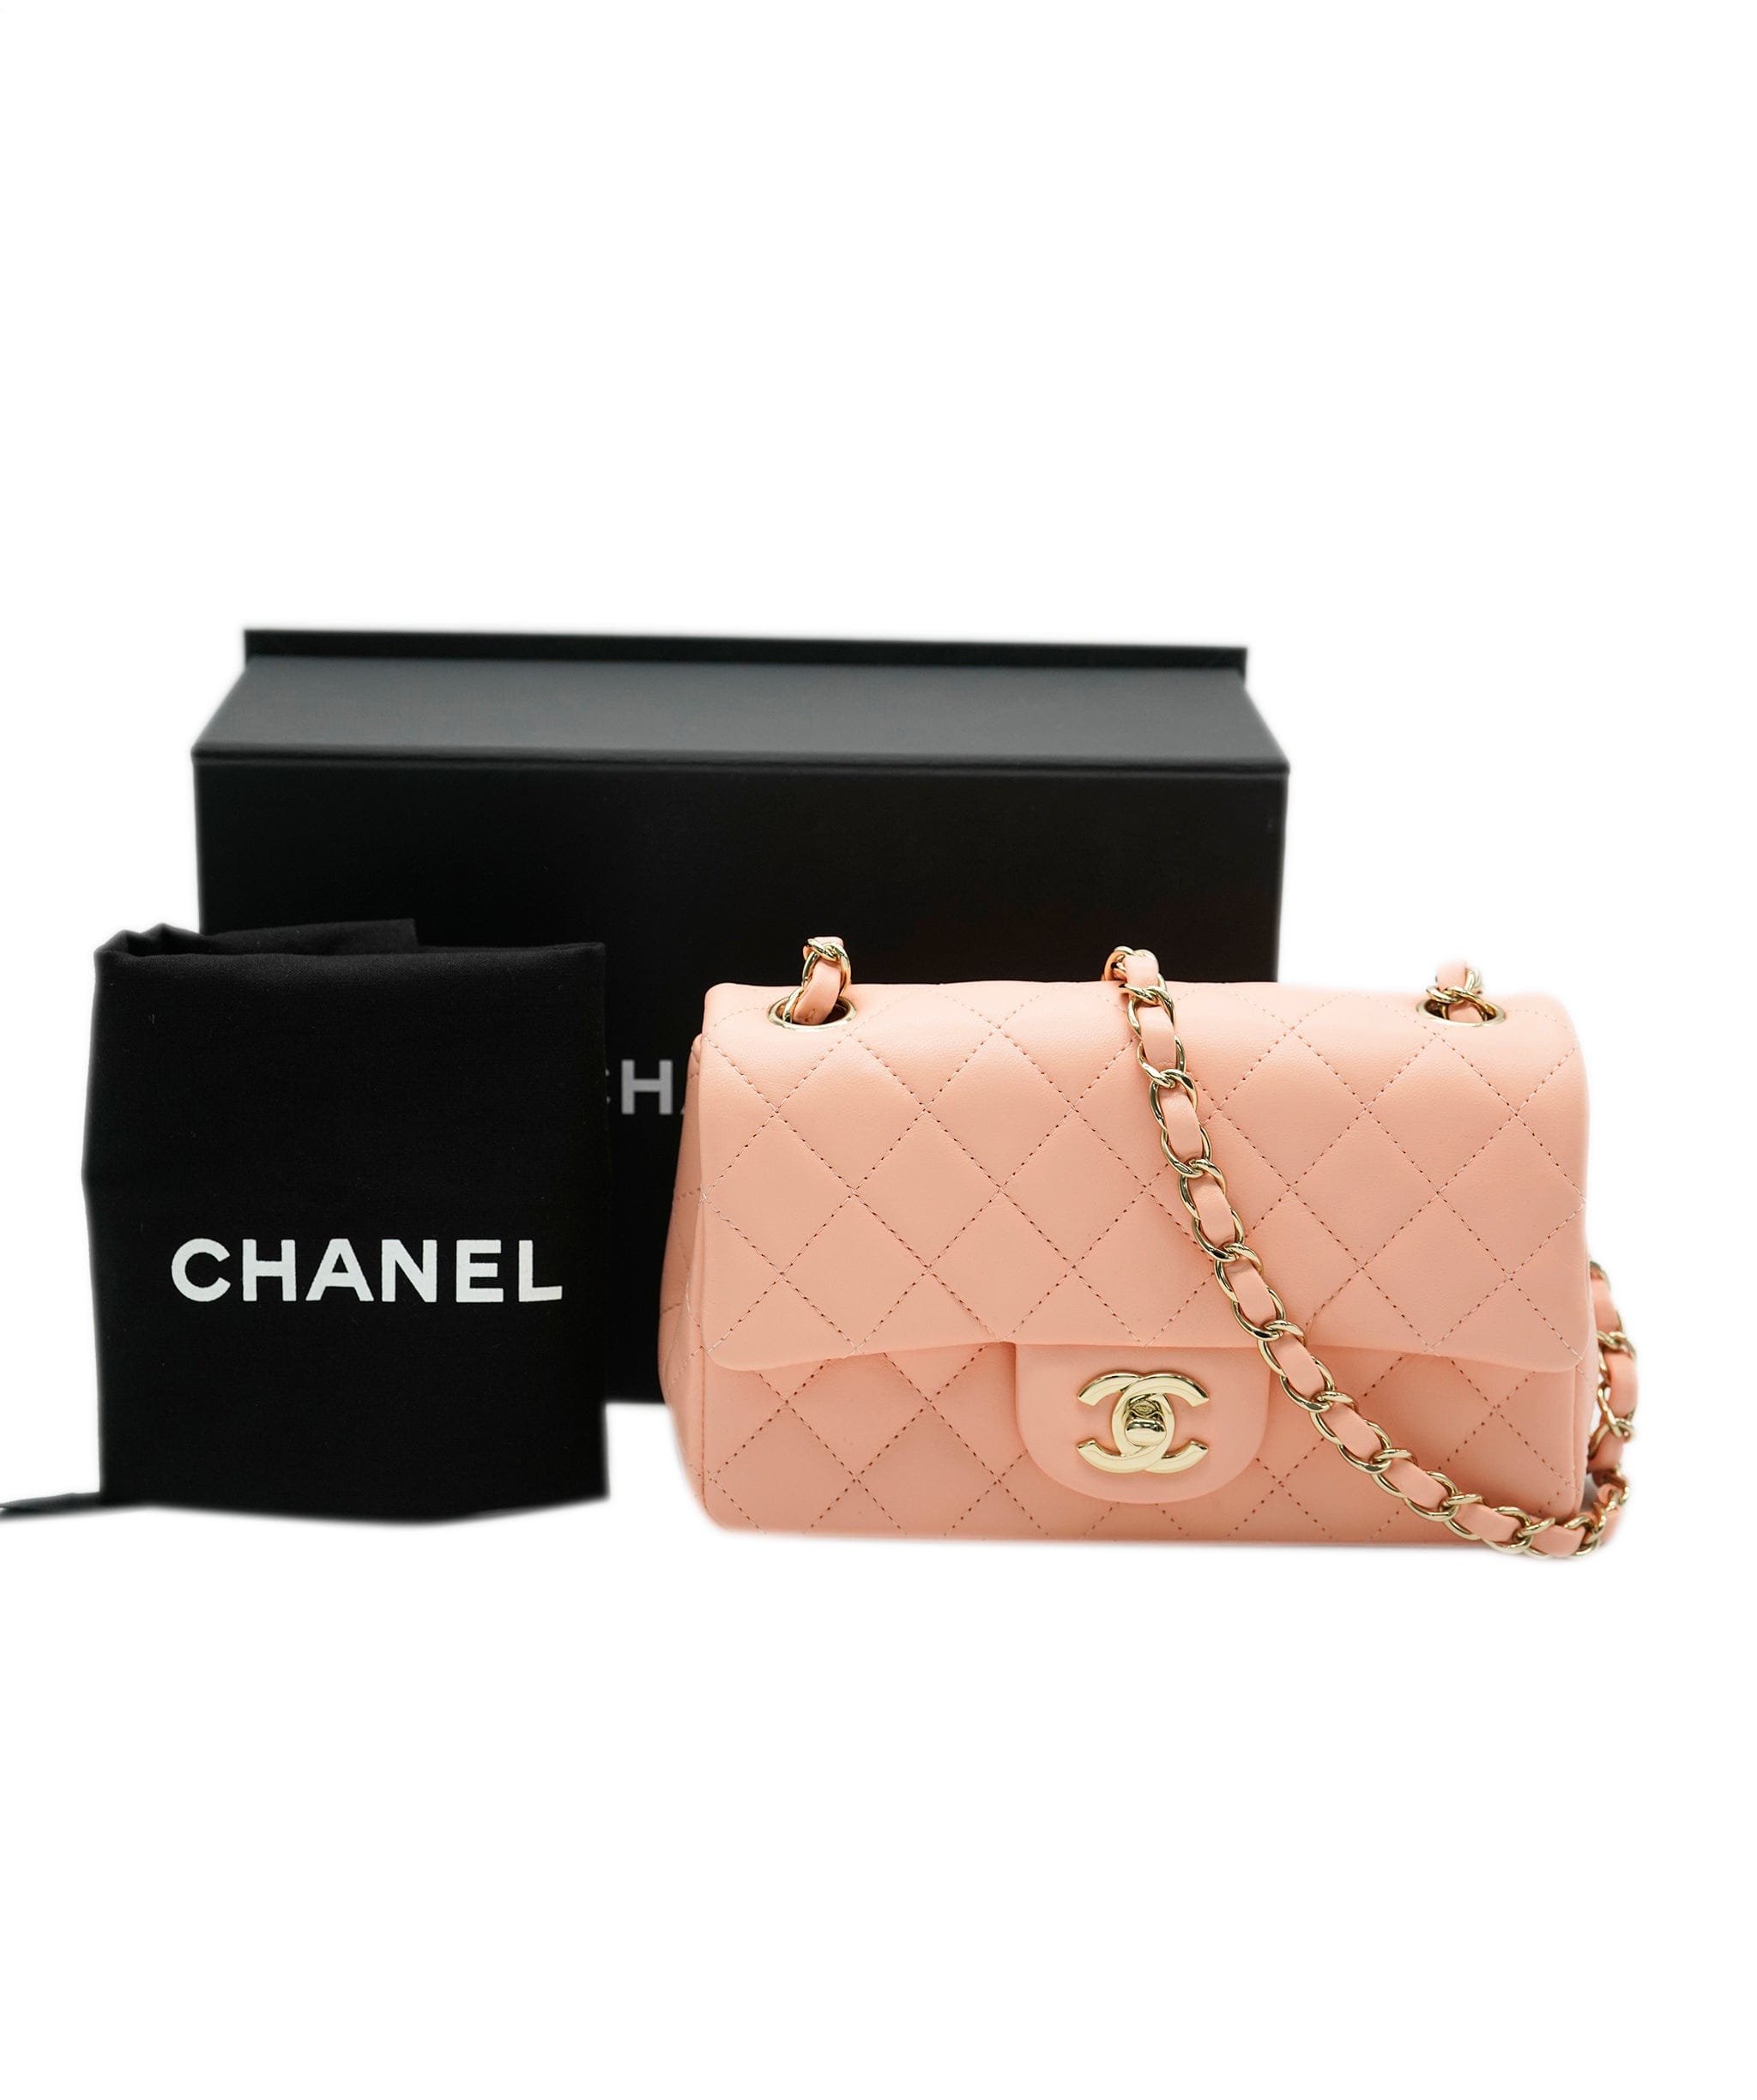 Chanel Chanel mini rectangular pink classic flap with champagne gold hardware - AJC0655